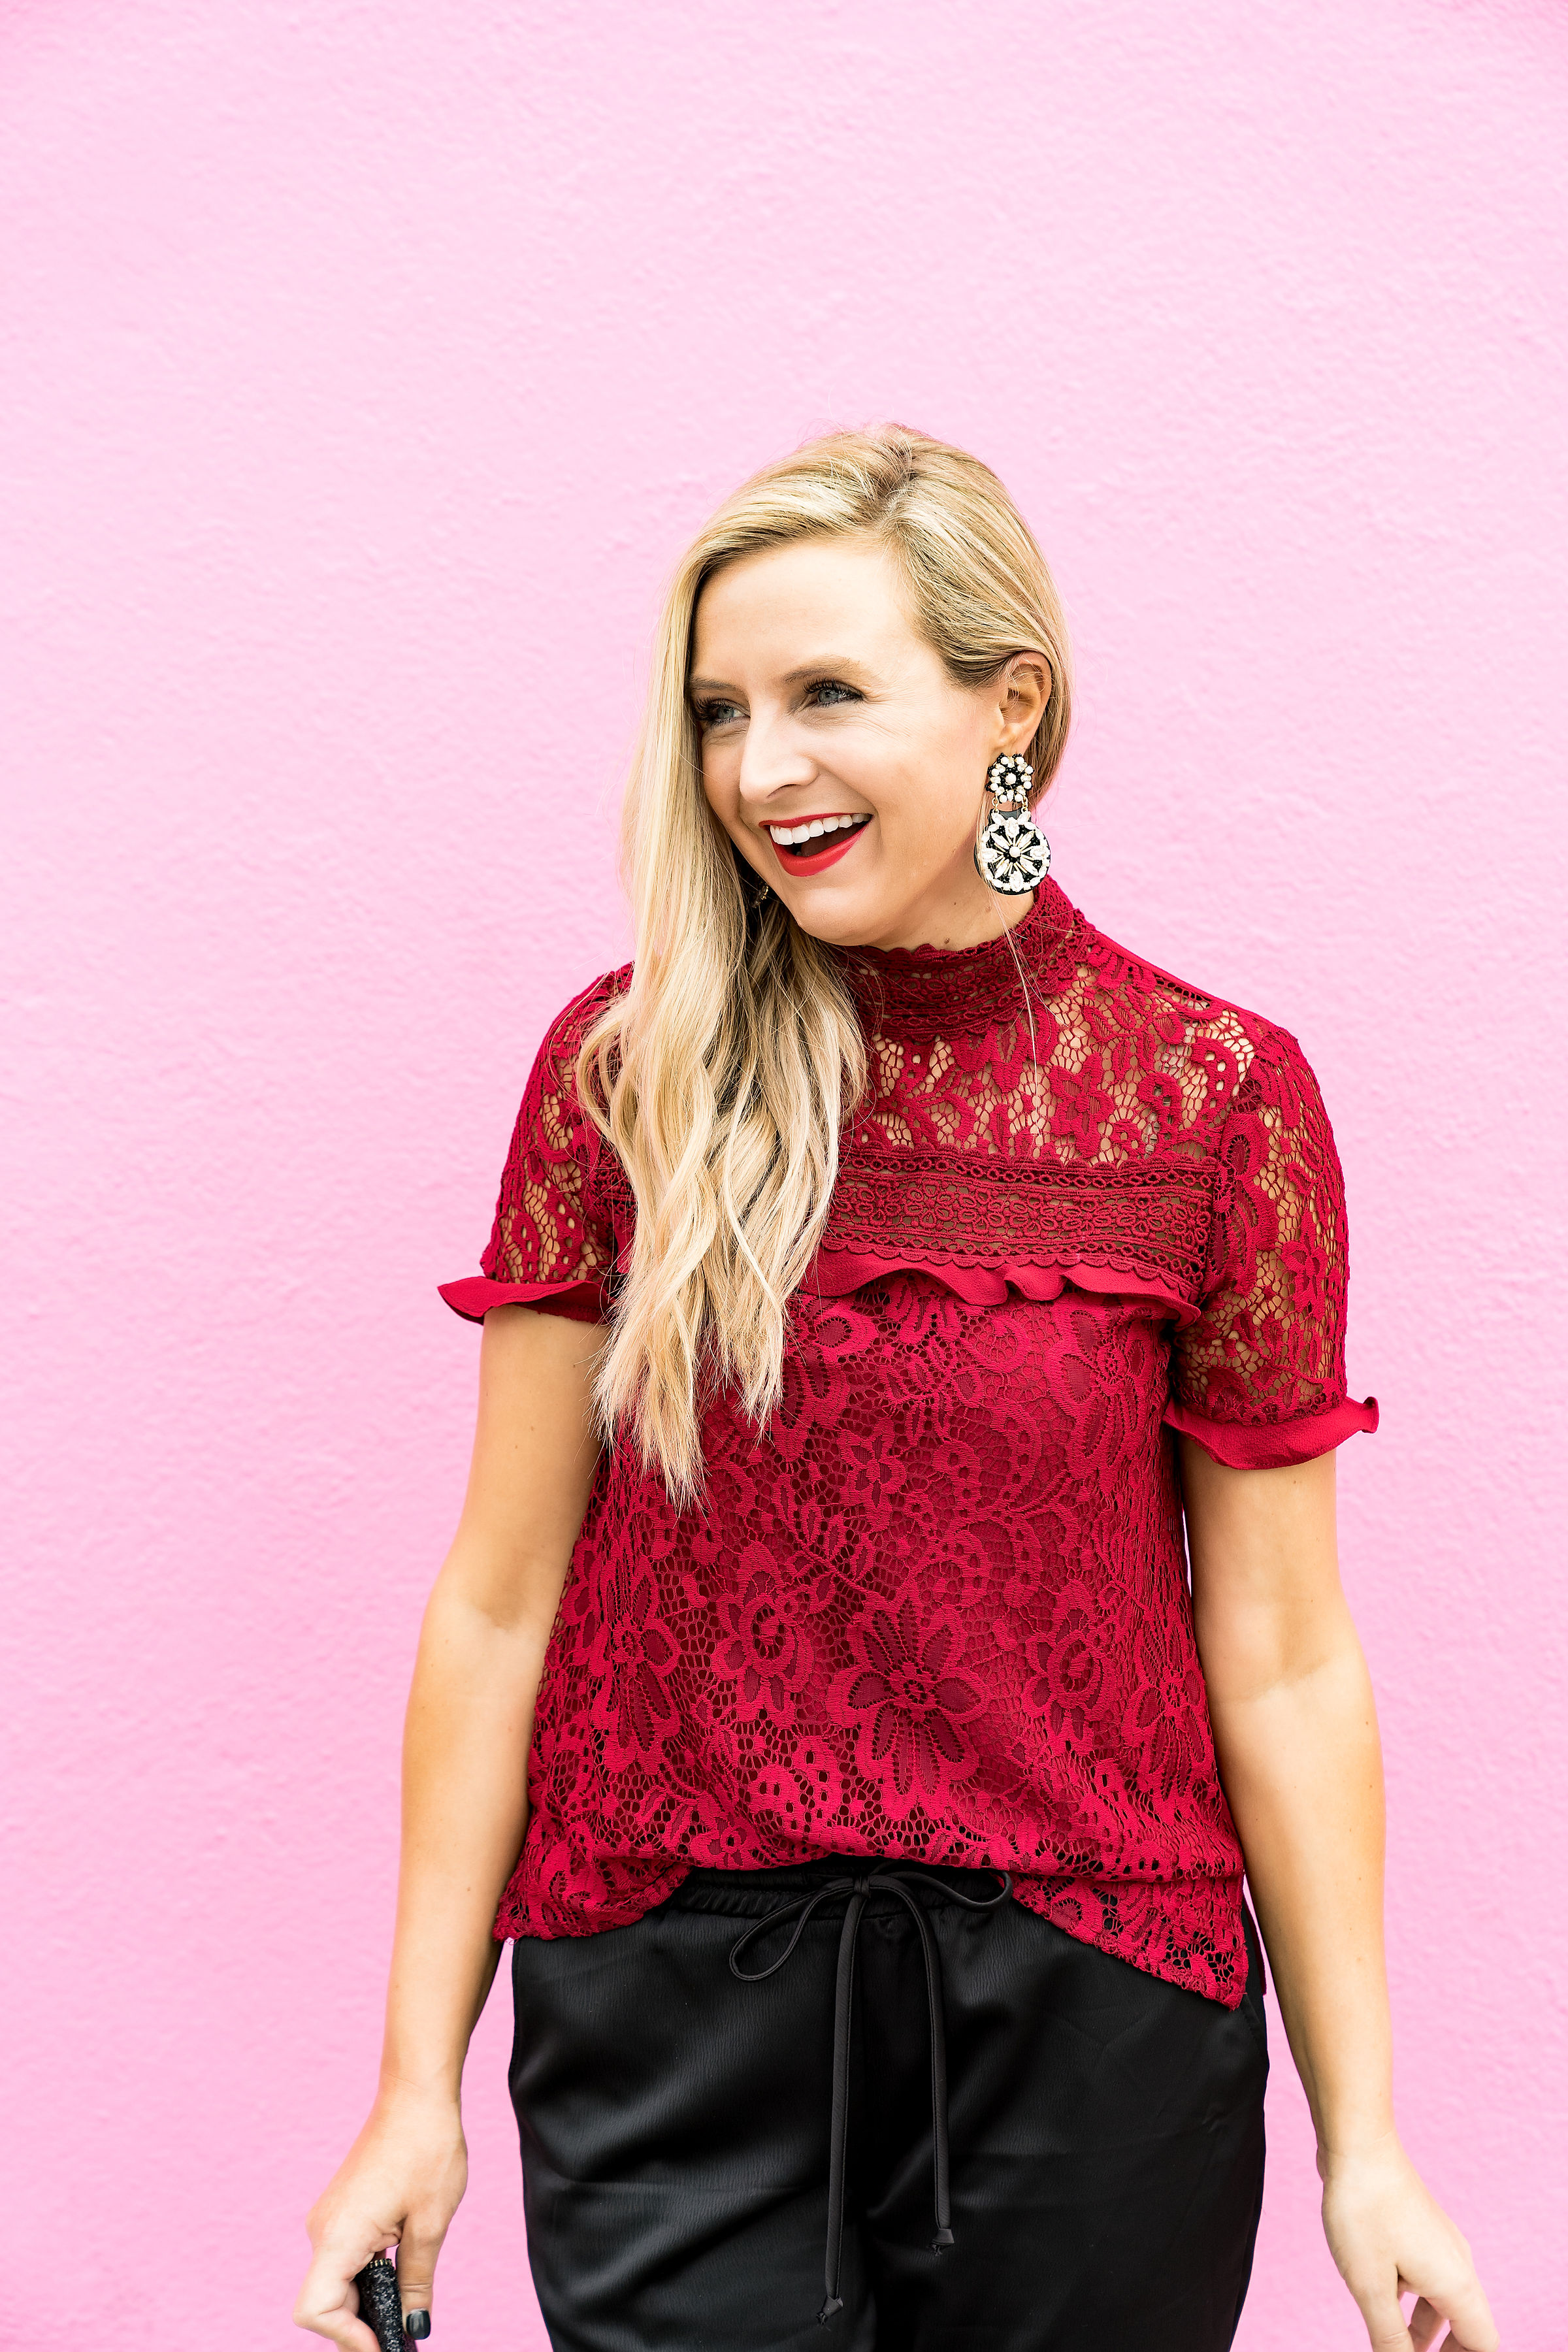 Top Houston fashion blogger, Fancy Ashley, features 7 Holiday Outfits perfect for the season: image of a woman wearing red lace top, black jogger pants, Kate Spade earrings, glitter clutch and sam Edelman leopard pumps all available at Nordstrom